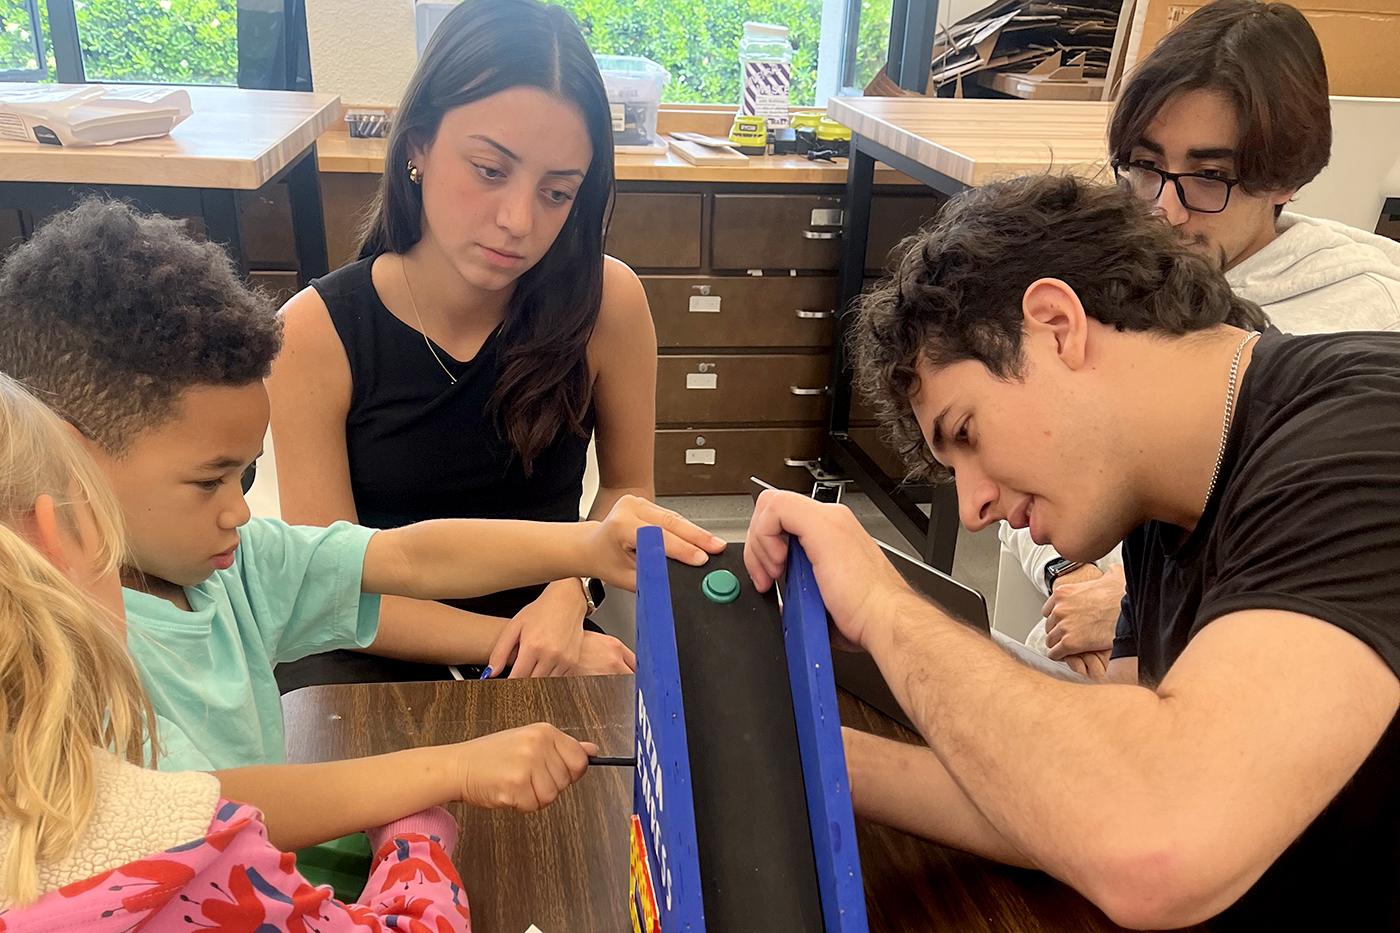 Cornerstone of Engineering students on Northeastern’s Oakland campus work with elementary school and their teachers, getting feedback and making incremental improvements